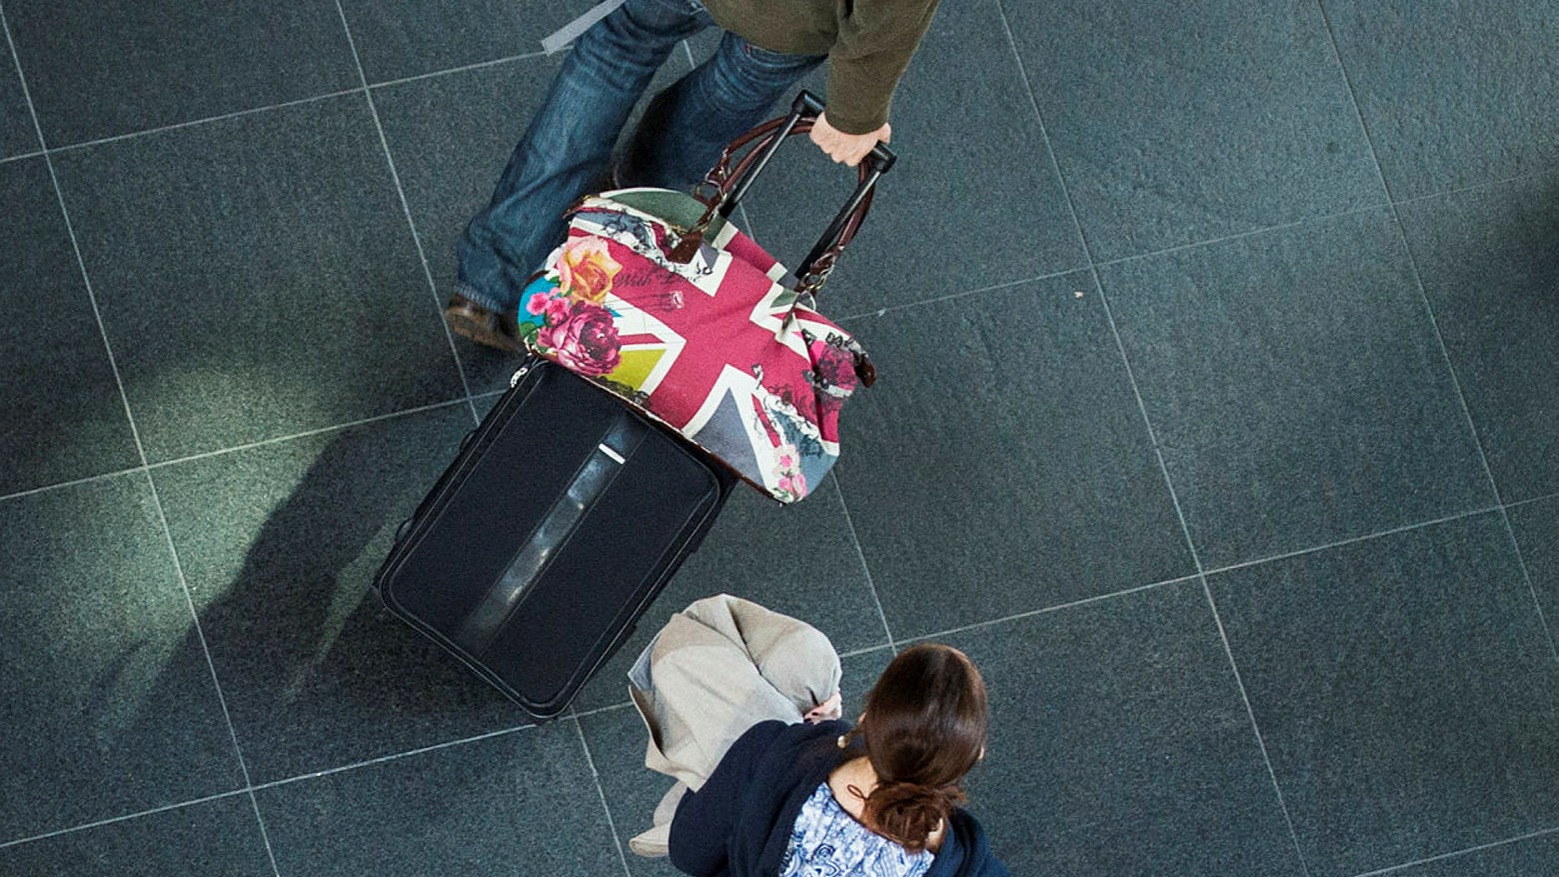 Two people with bags, British flag, viewed from above